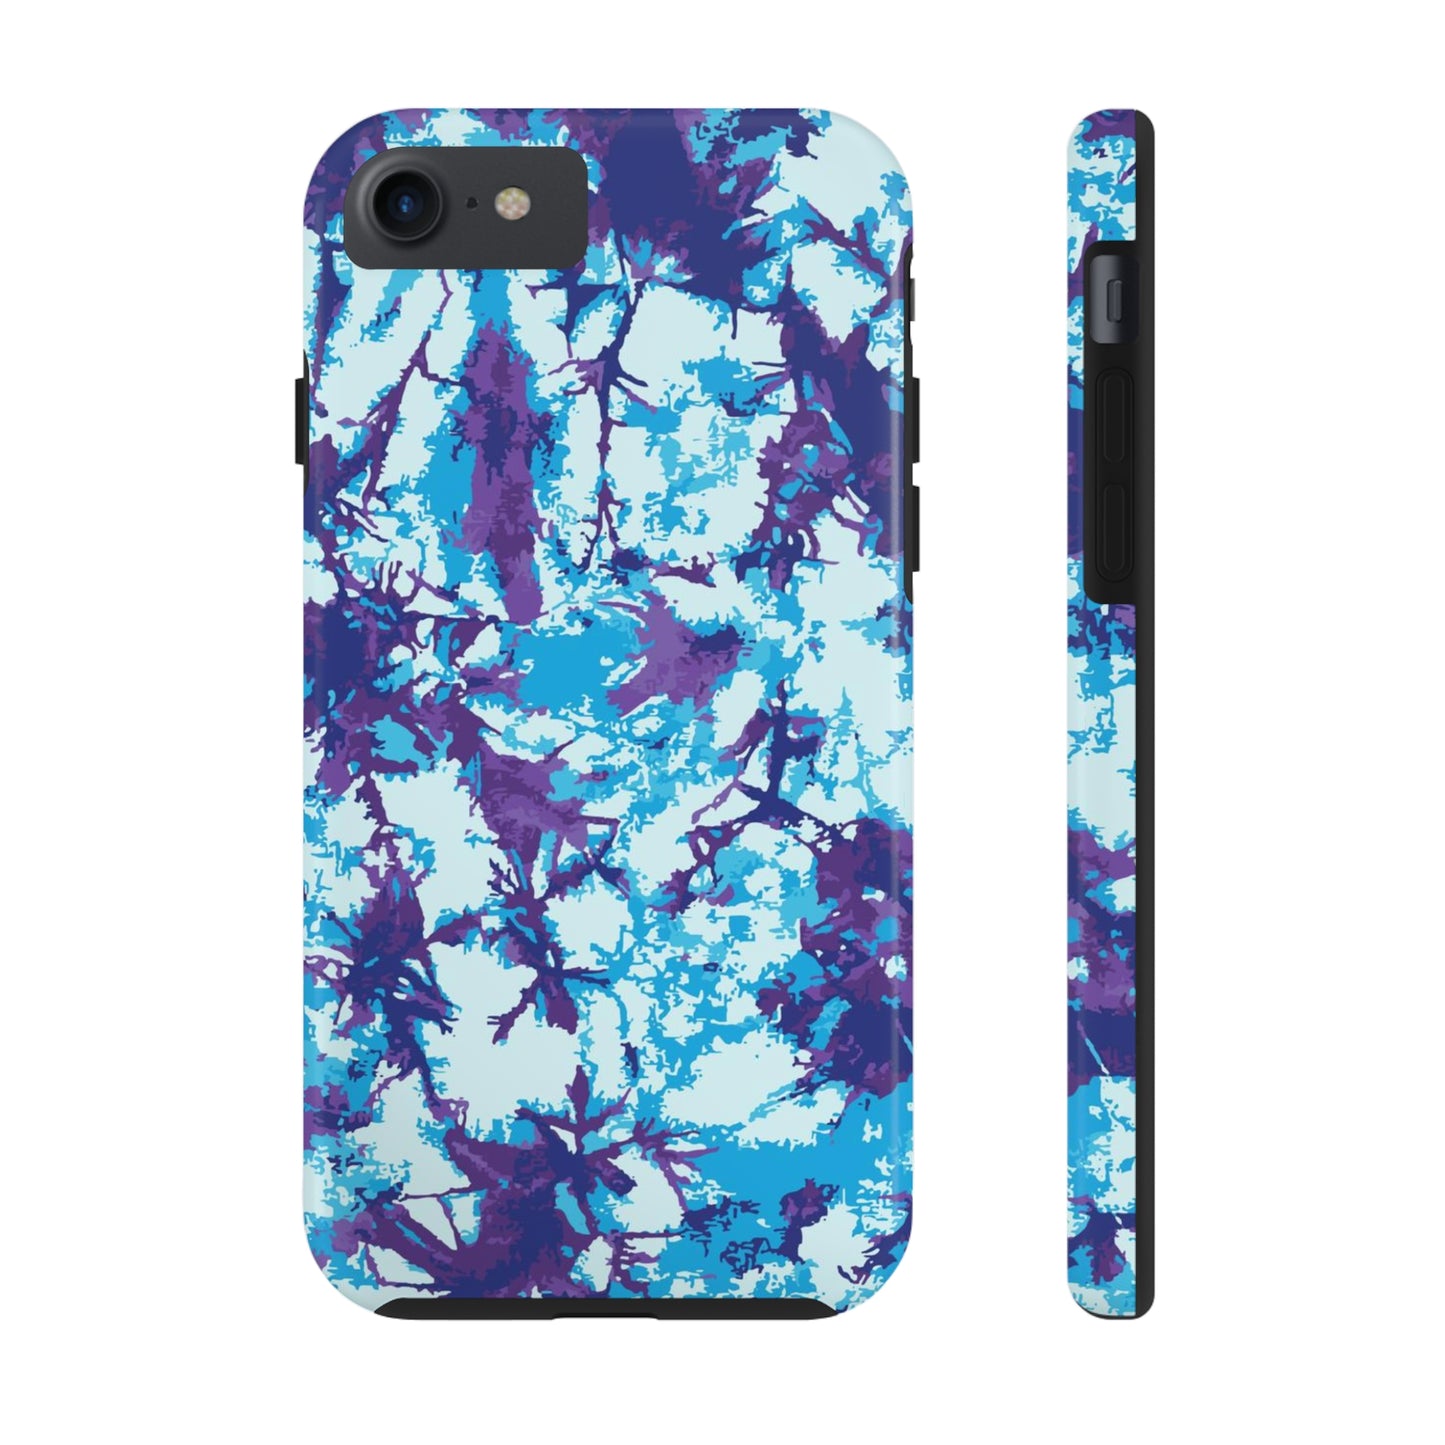 Violet & Blue Tie Dye Only / iPhone Case